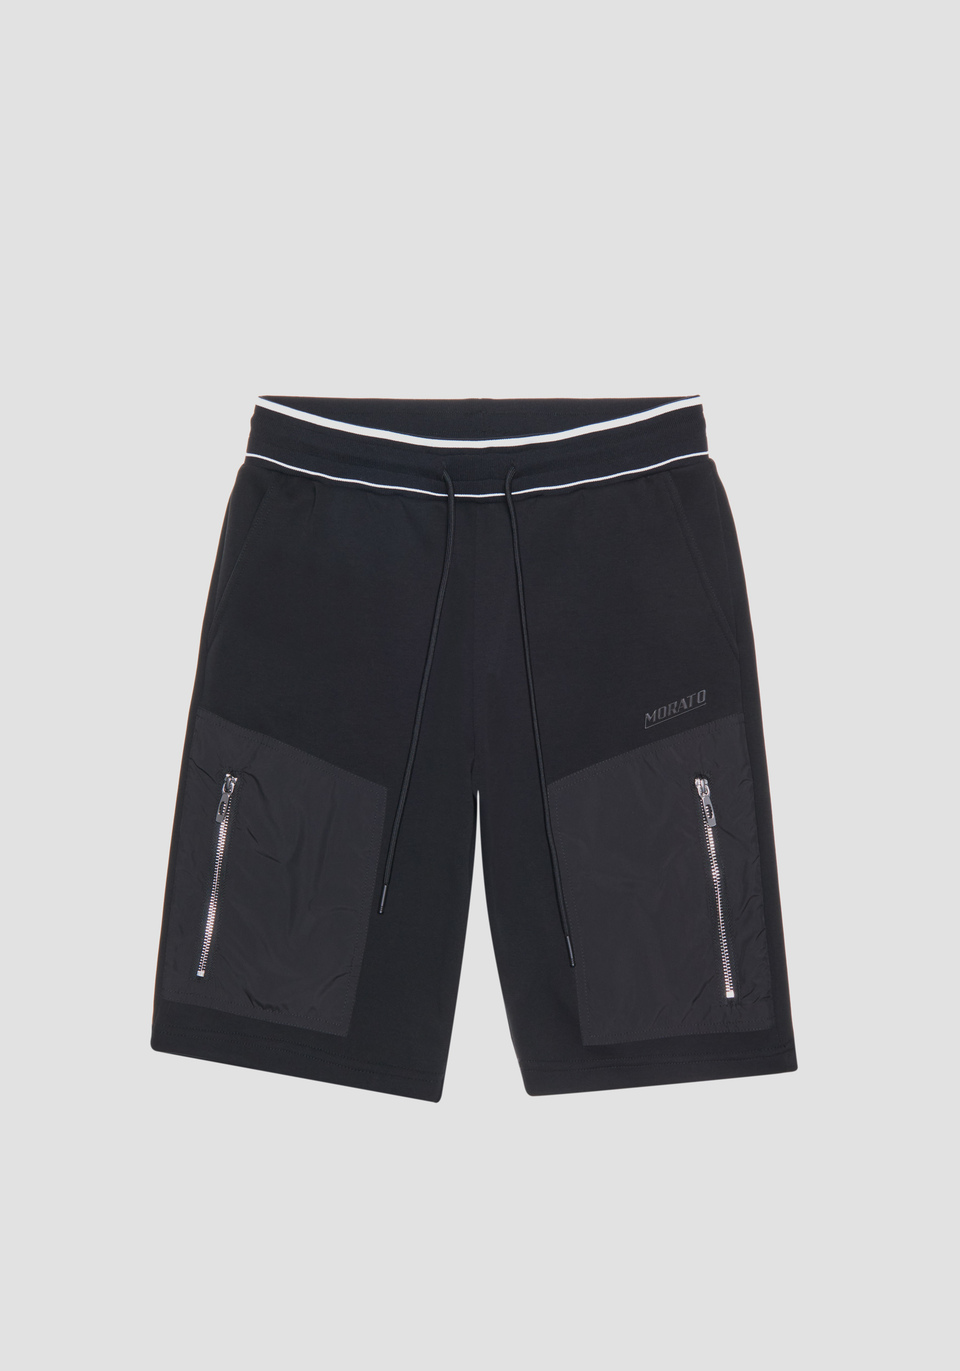 REGULAR FIT SWEATSHORTS IN SOFT COTTON BLEND WITH ZIPPED POCKETS - Antony Morato Online Shop